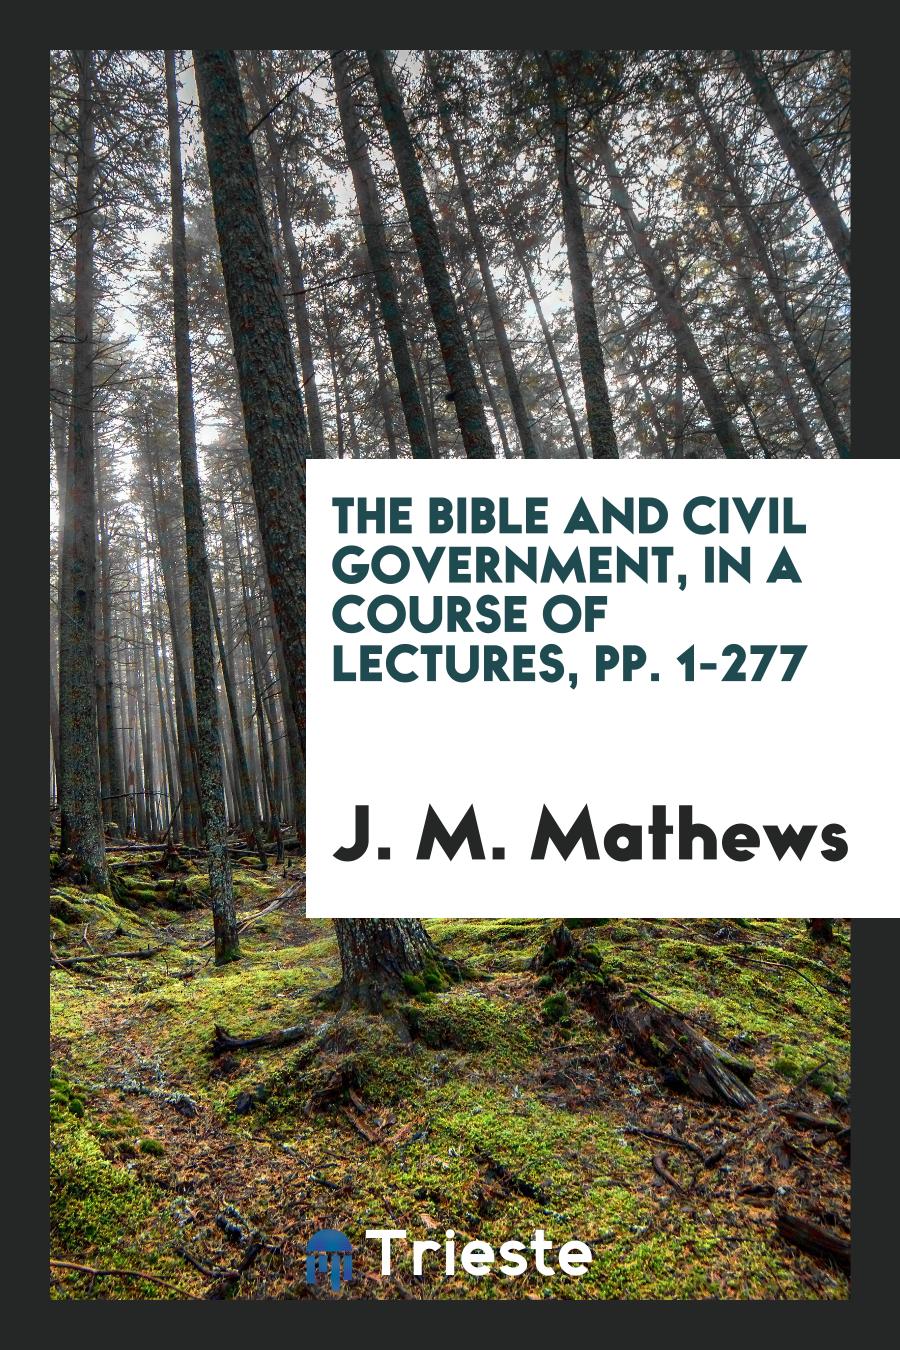 The Bible and Civil Government, in a Course of Lectures, pp. 1-277